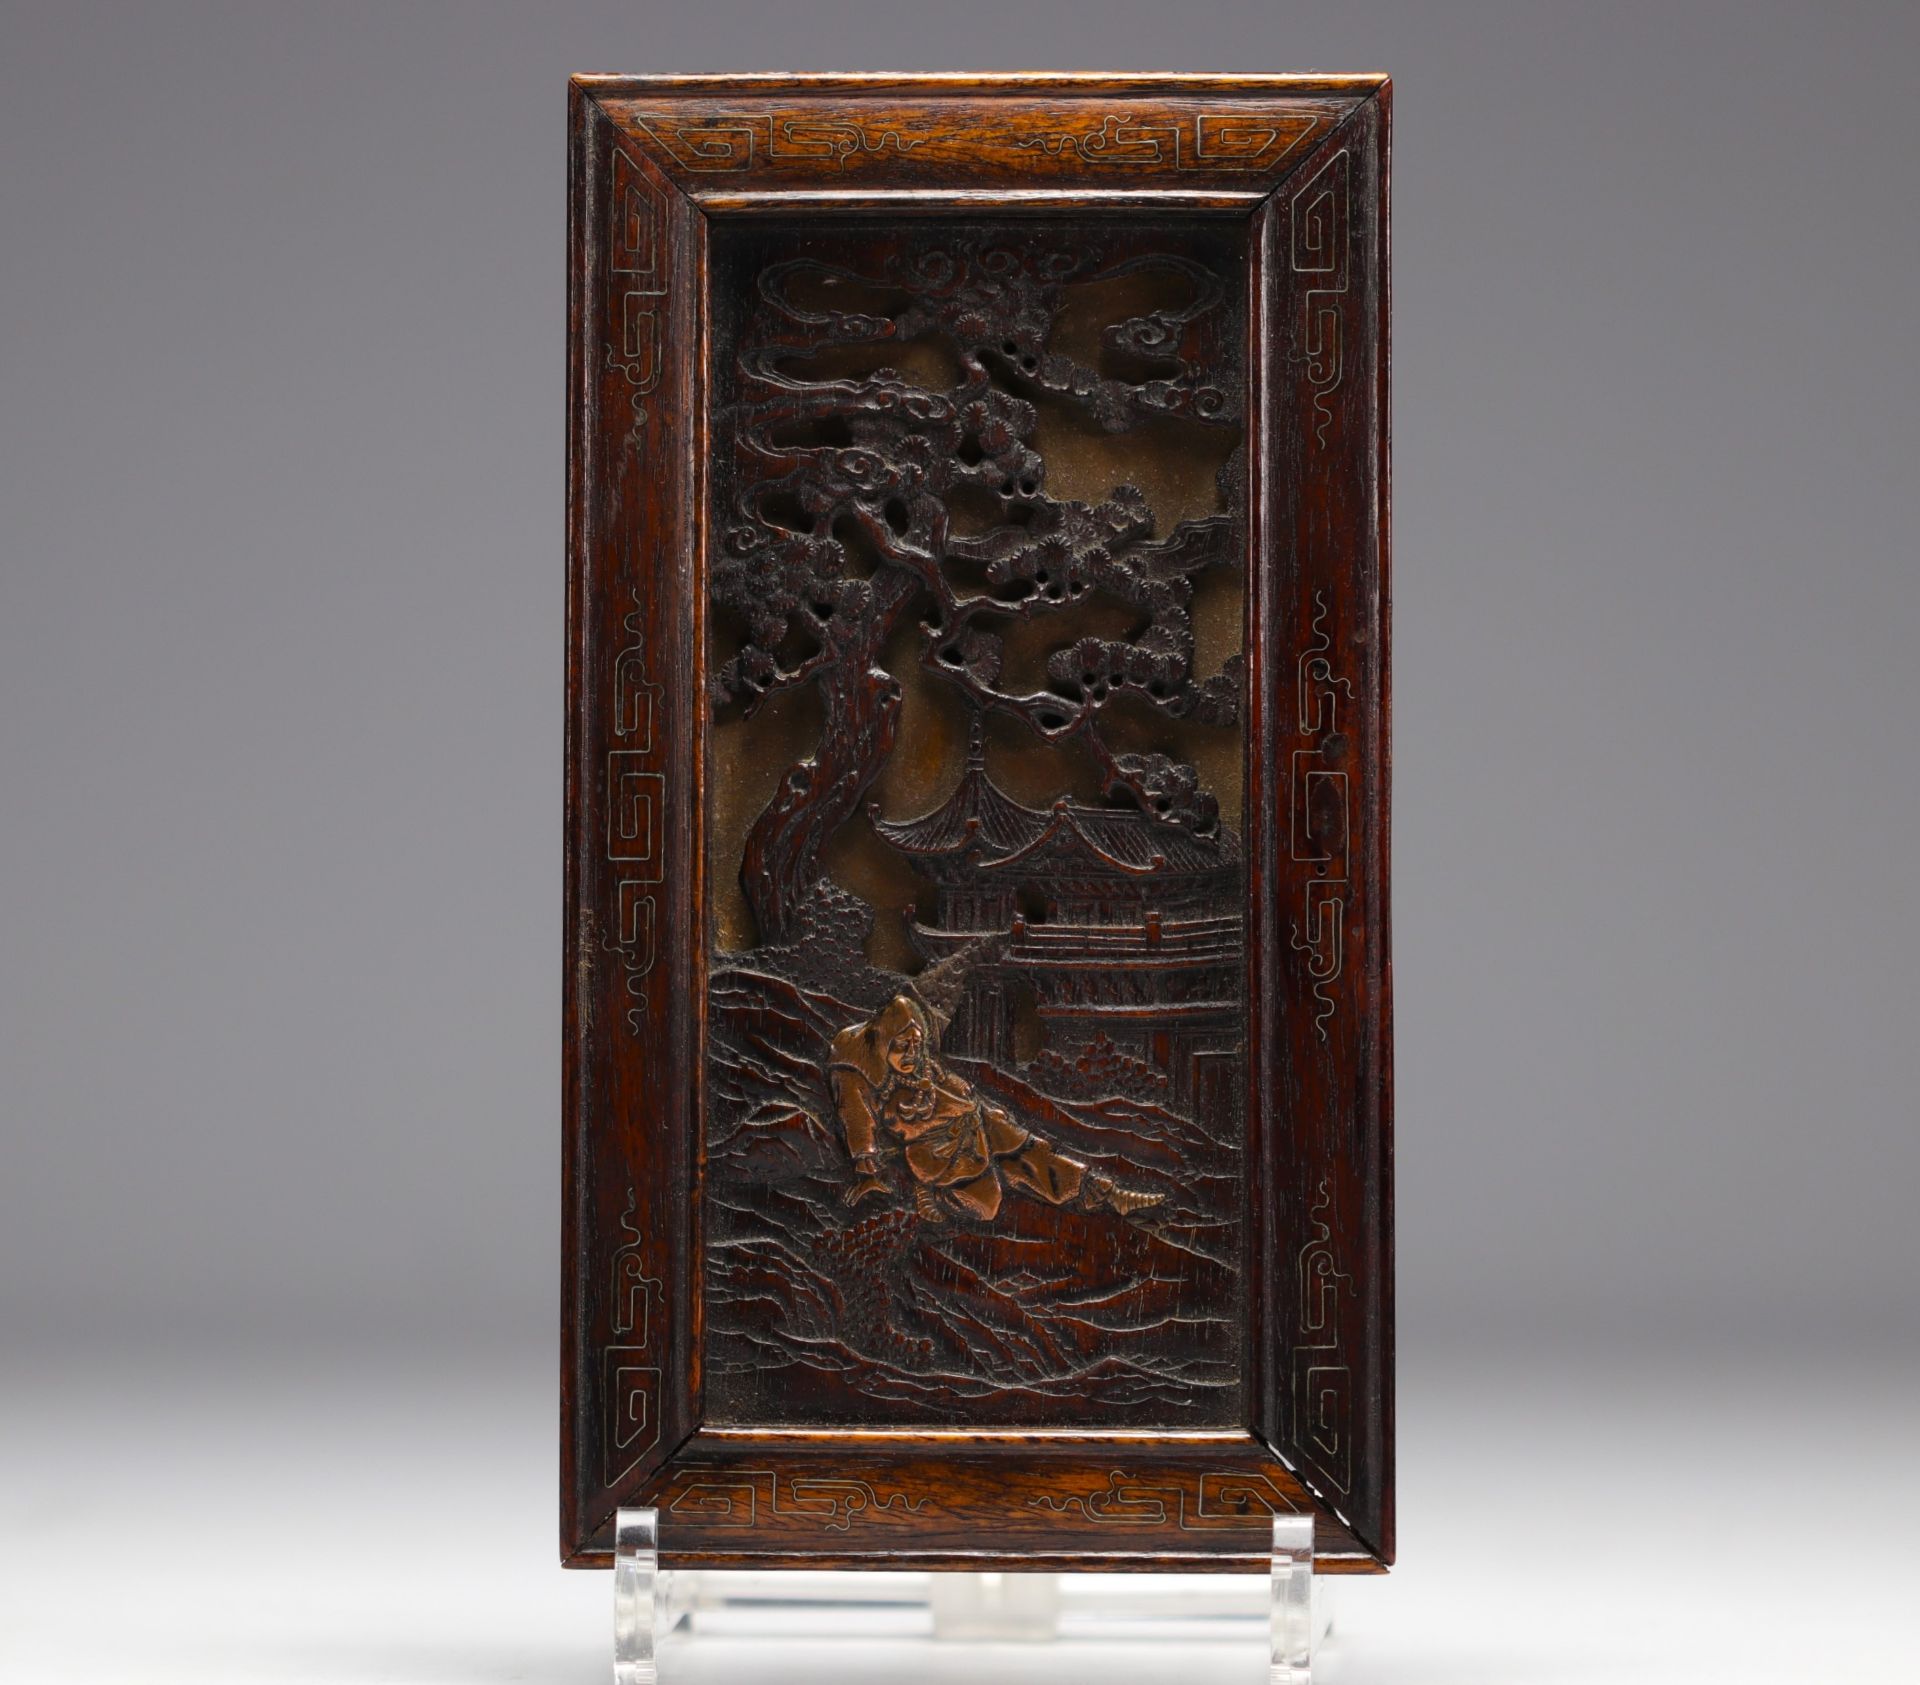 Japan - Pair of small carved wooden panels, bronze figures, filigree frames, Meiji period. - Image 2 of 3